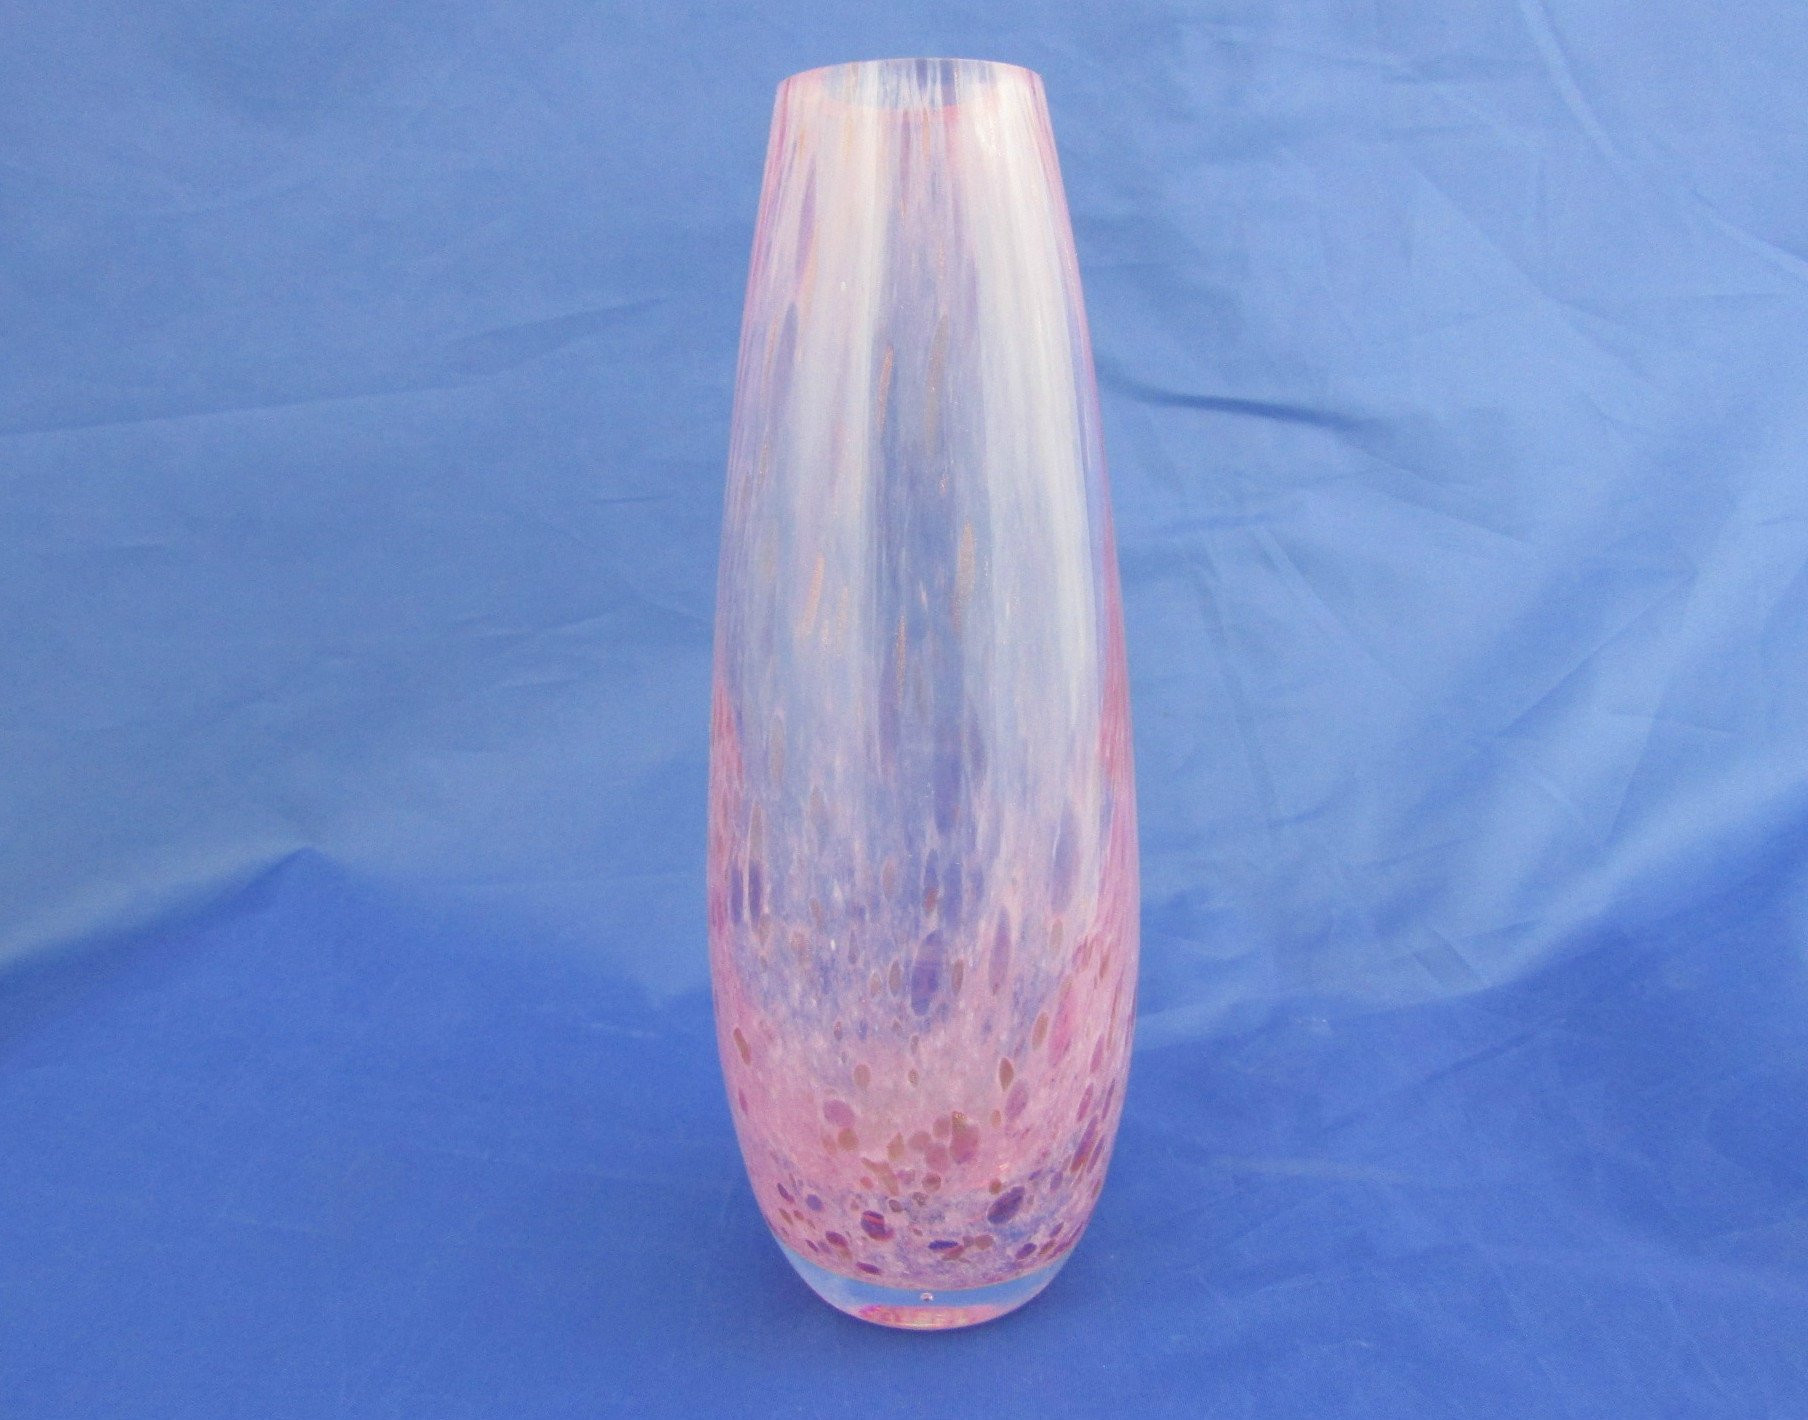 13 Best Square Glass Vases for Sale 2024 free download square glass vases for sale of caithness glass vase teardrop shaped vase pink spatter glass etsy throughout dc29fc294c28ezoom